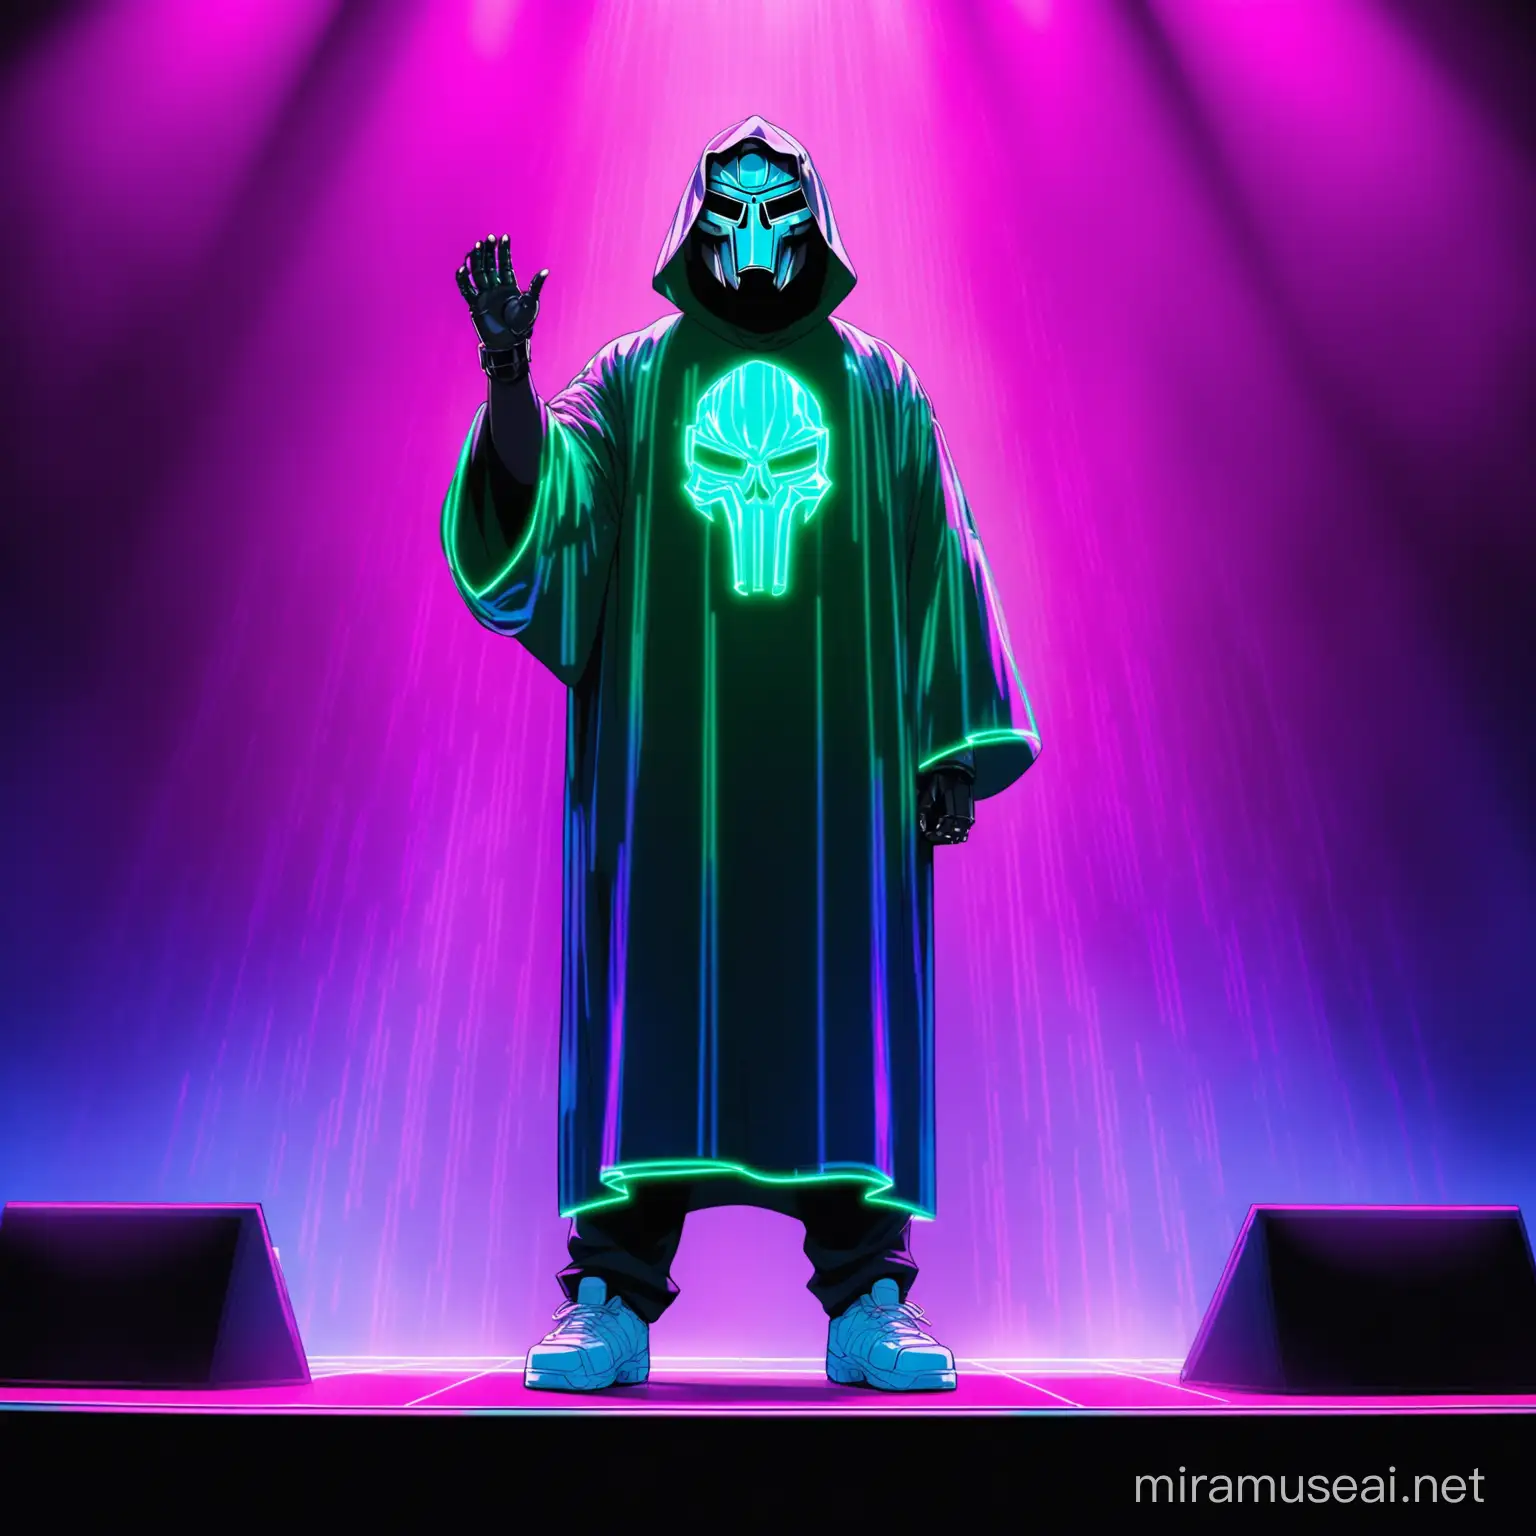 MF DOOM AS A FULL-BODY HOLOGRAM
ON A STAGE WITH NEON COLORS